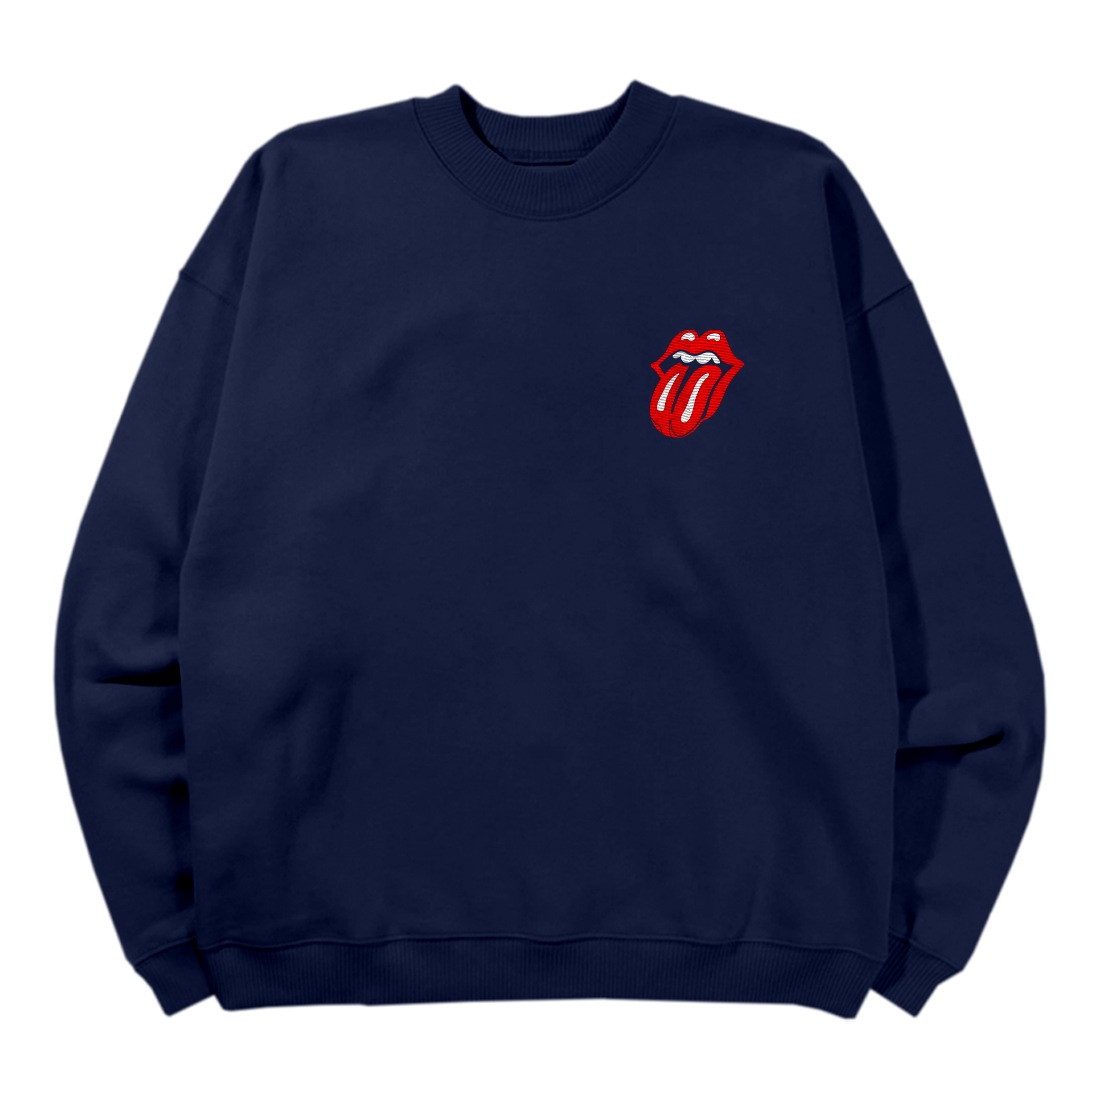 https://images.bravado.de/prod/product-assets/product-asset-data/rolling-stones-the/the-rolling-stones/products/503889/web/391245/image-thumb__391245__3000x3000_original/The-Rolling-Stones-Forty-Licks-Longsleeves-navy-503889-391245.d58c2731.png